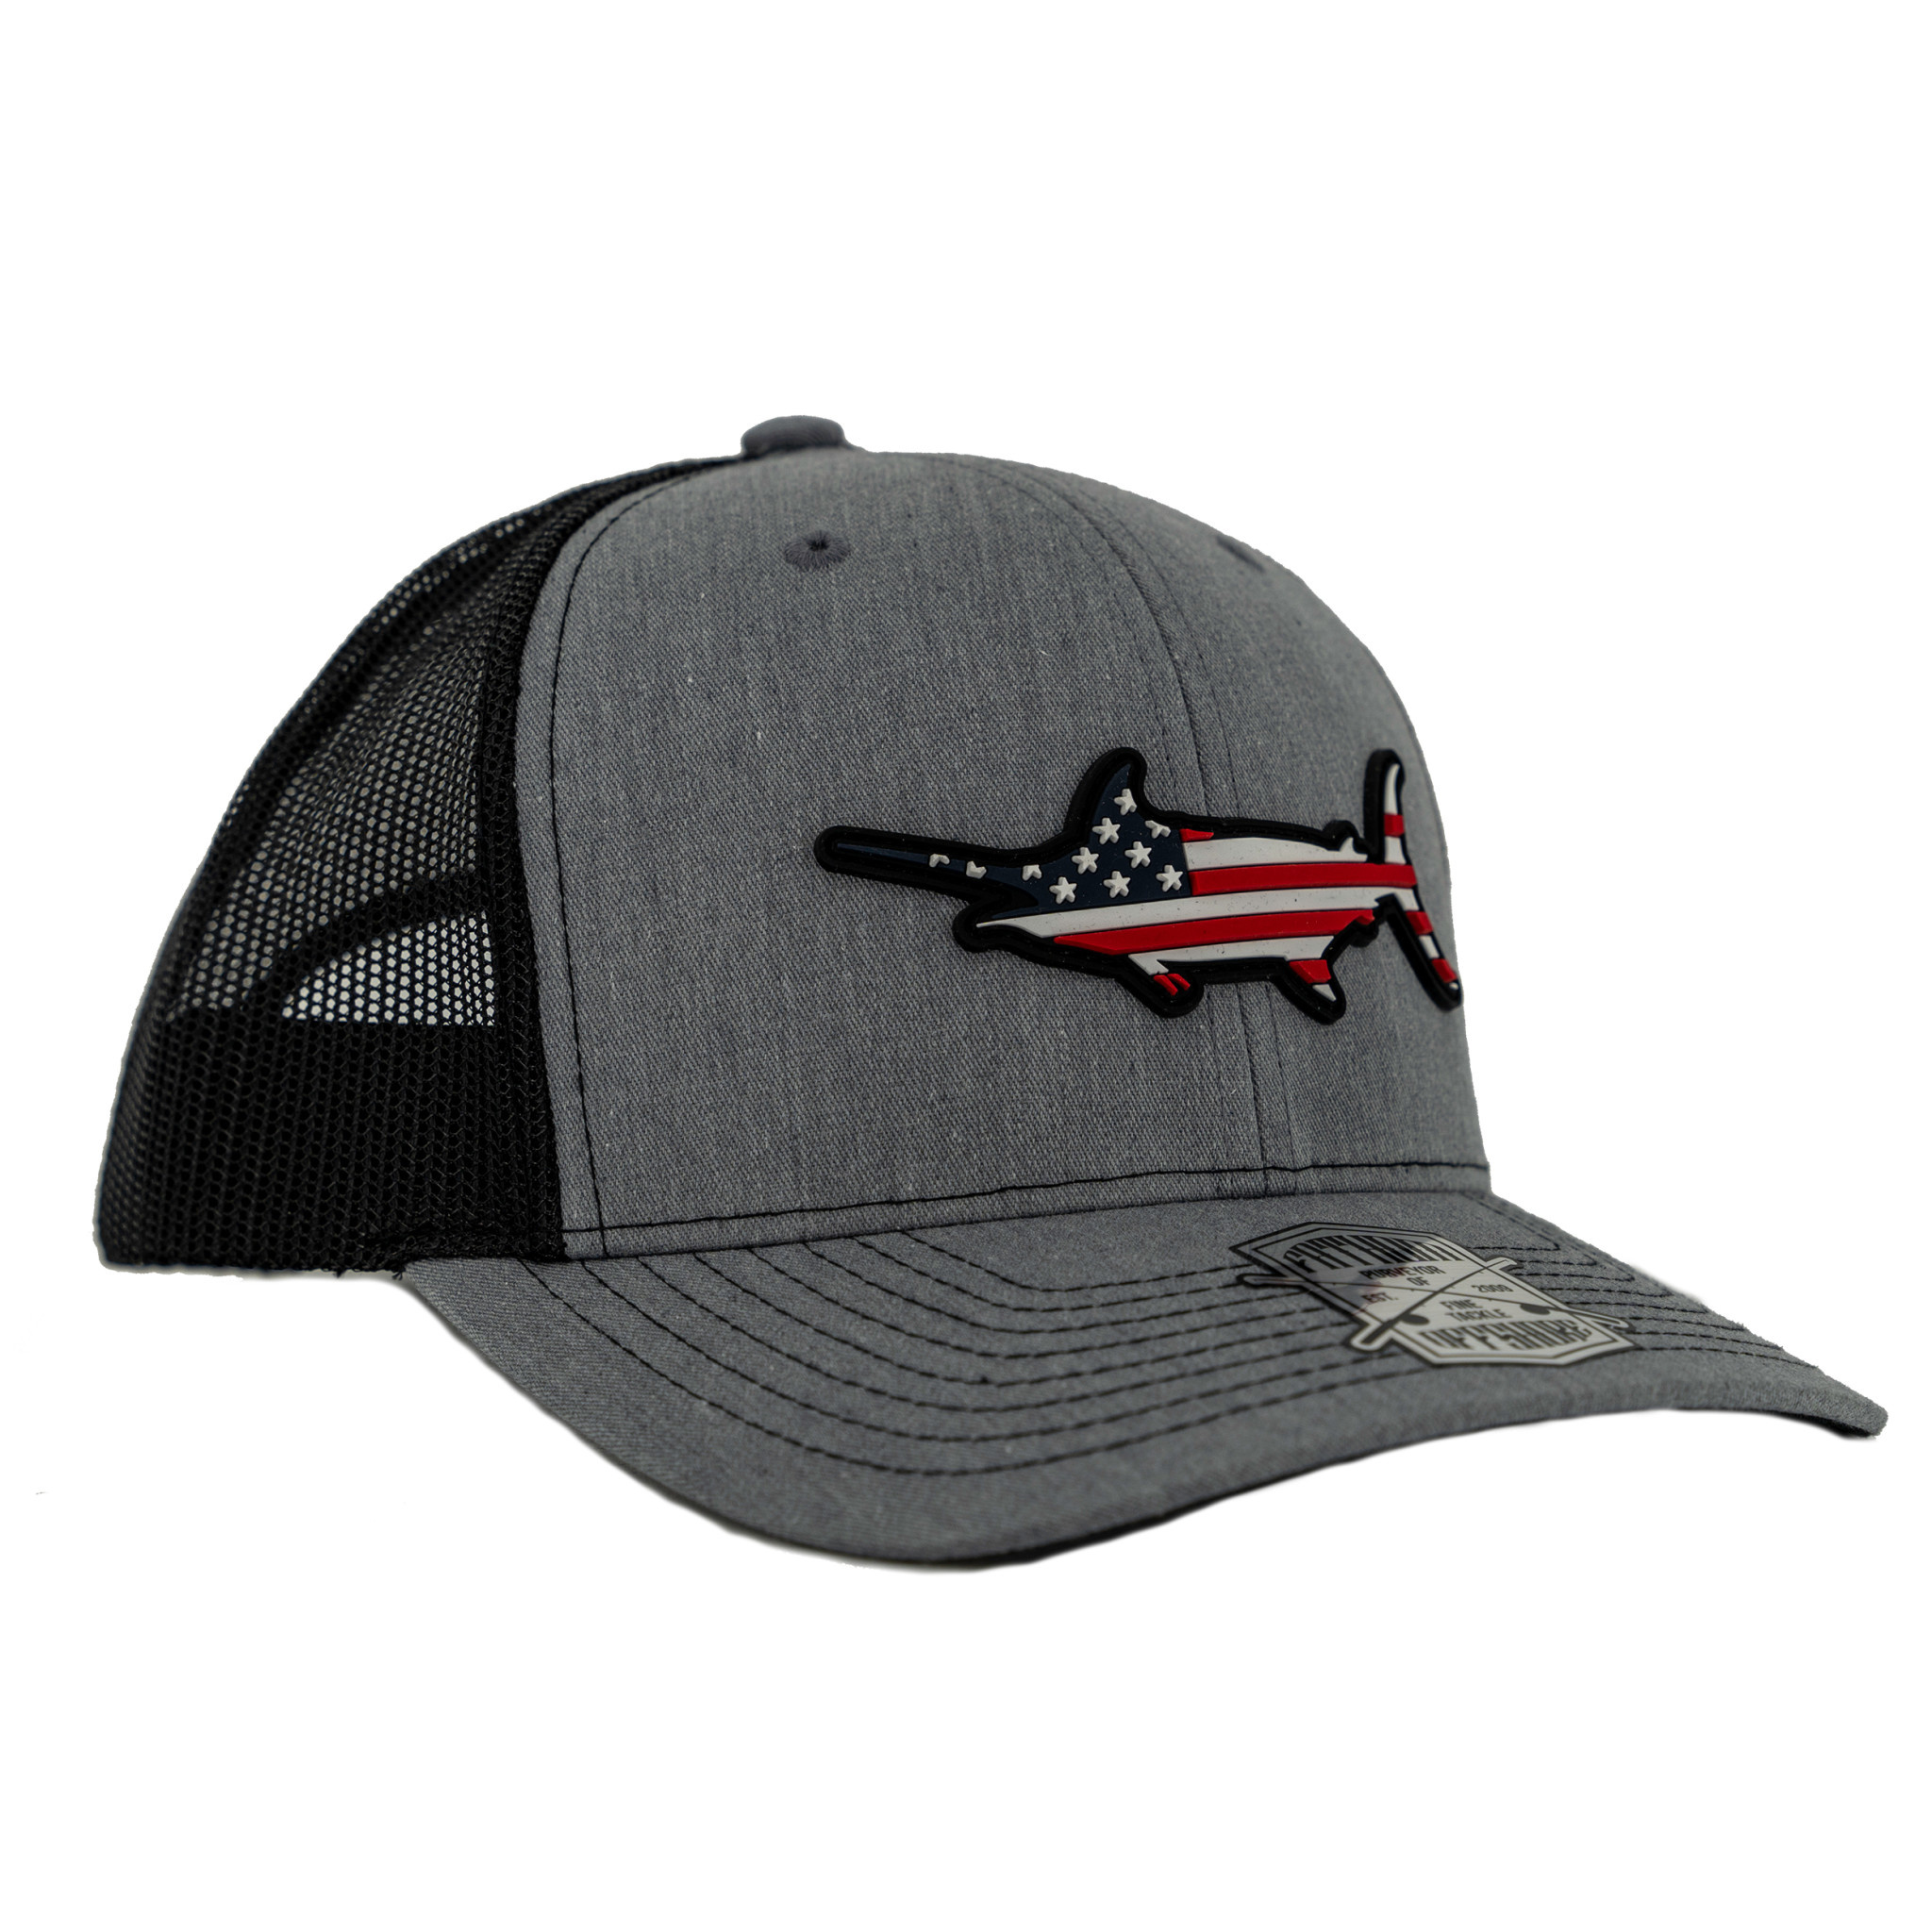 Fathom Offshore Stars and Bars Truckers Cap Charcoal - Florida Watersports